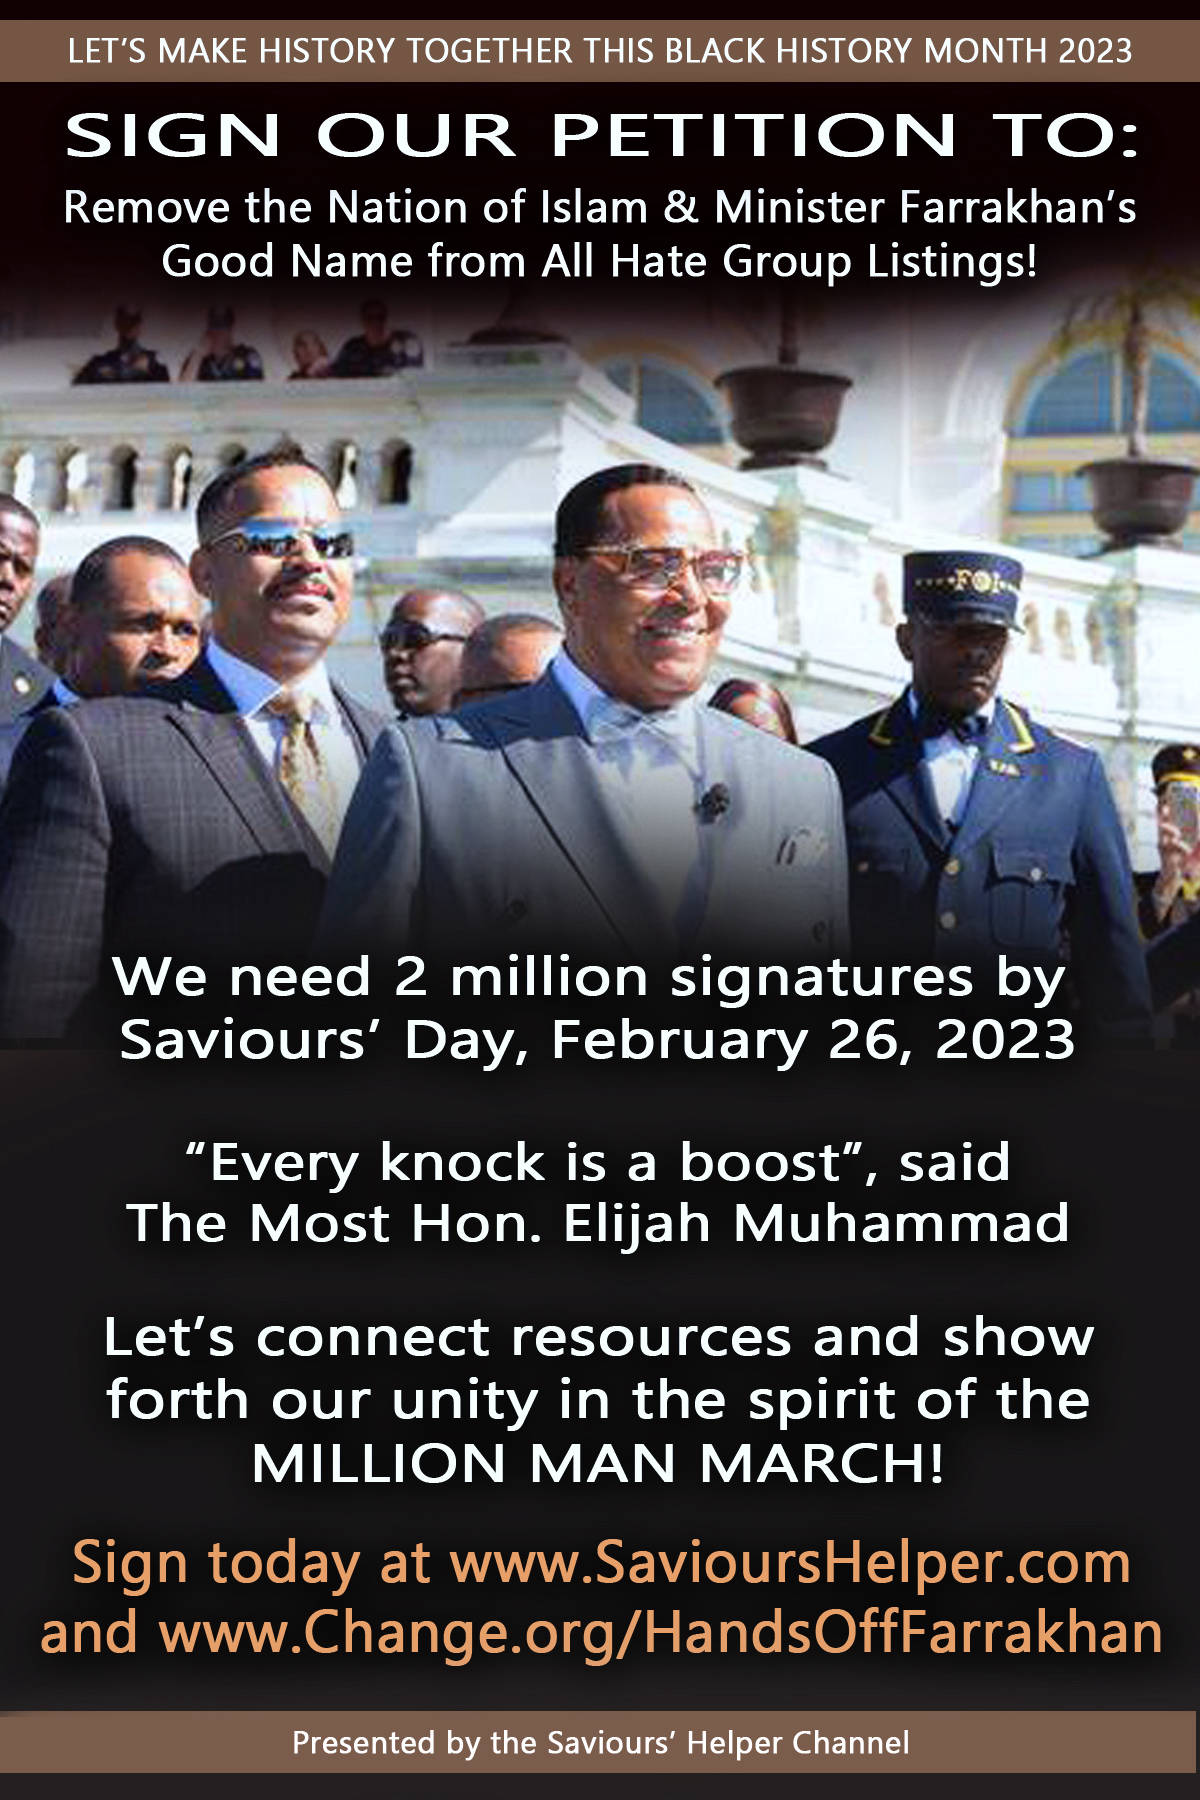 Sign Our Petition to help the Nation of Islam today!